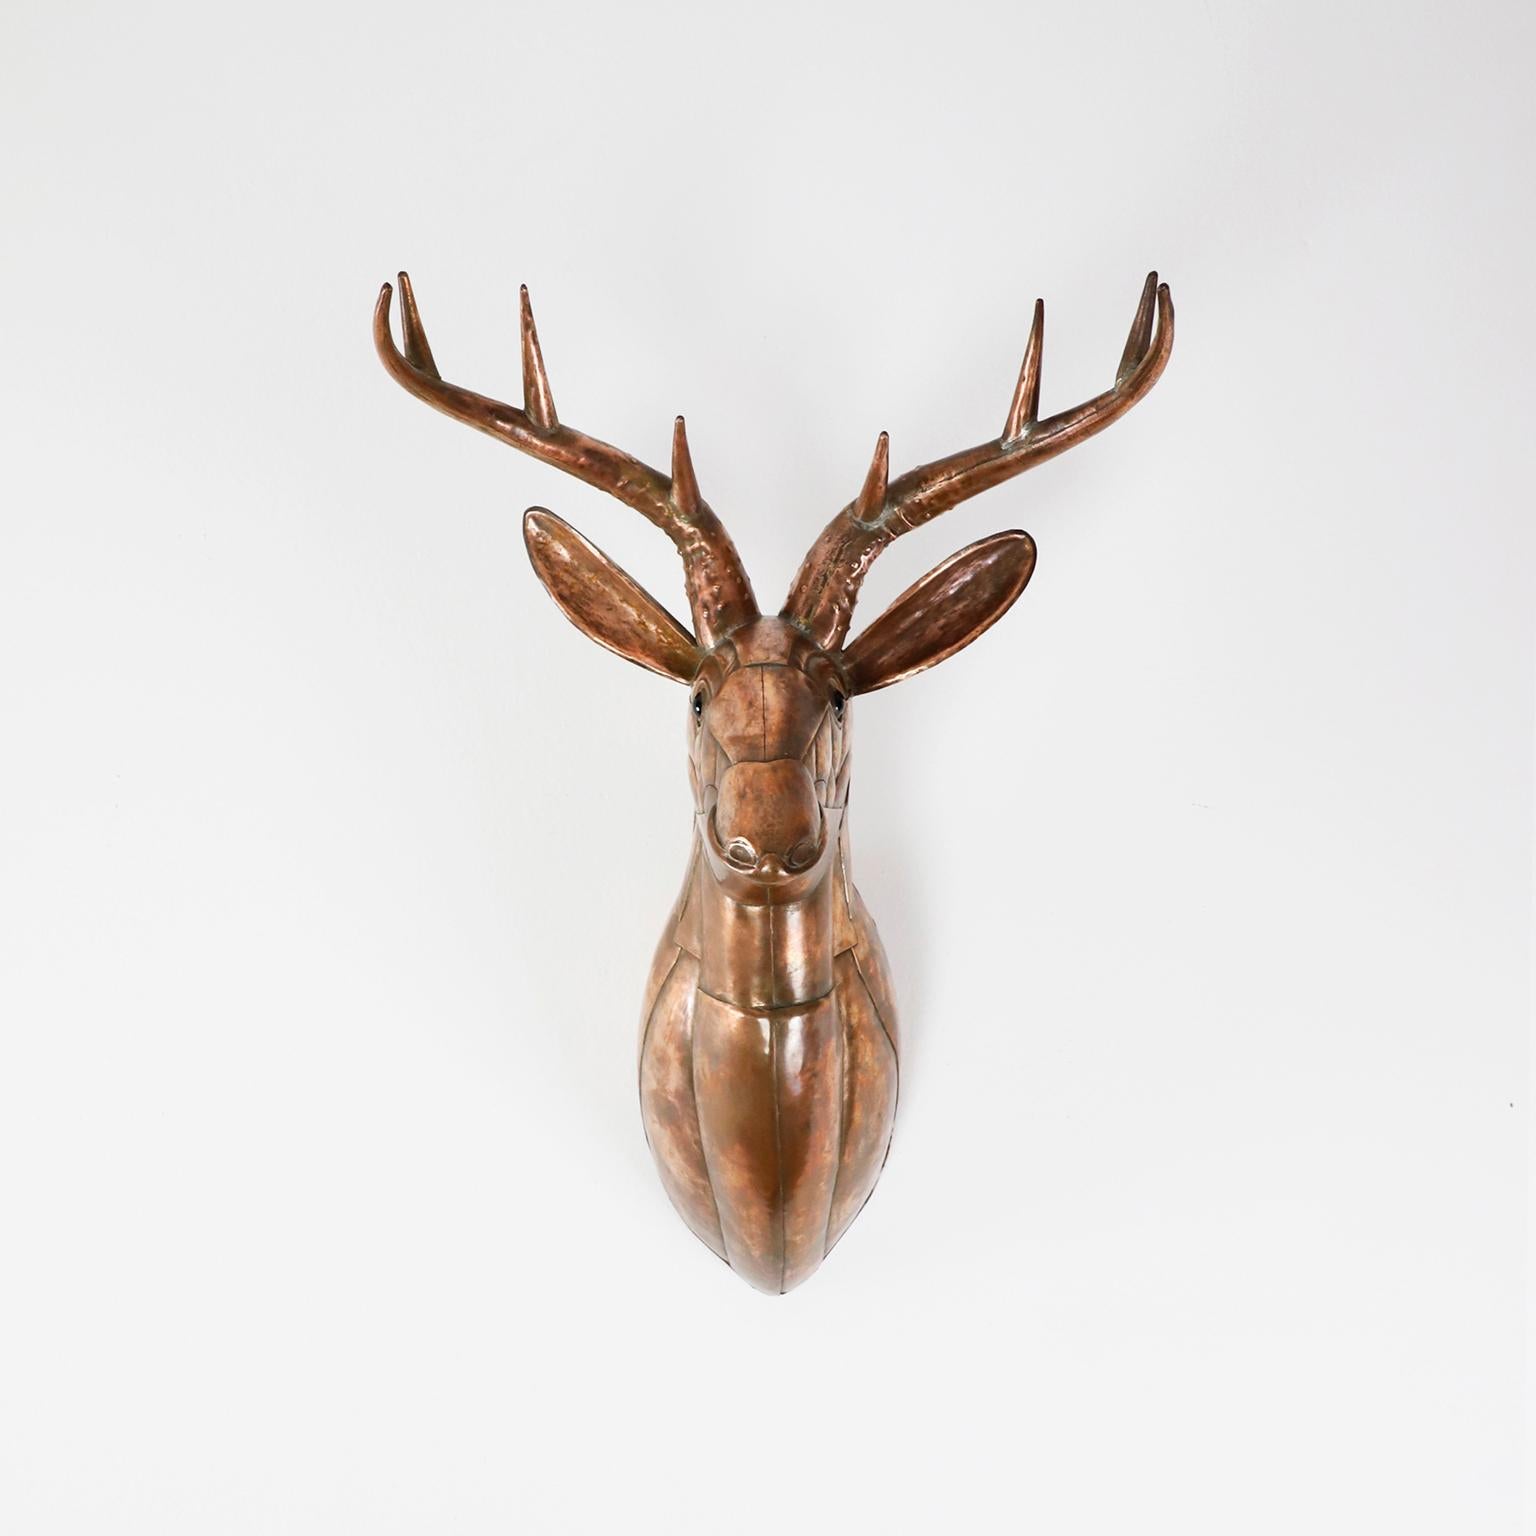 Mounted Stag head in strong copper, cut bent and assembled, circa 1960.

Sergio Bustamante is a Mexican Artist and sculptor. He began with paintings and papier mache figures, inaugurating the first exhibit of his works at the Galeria Misracha in